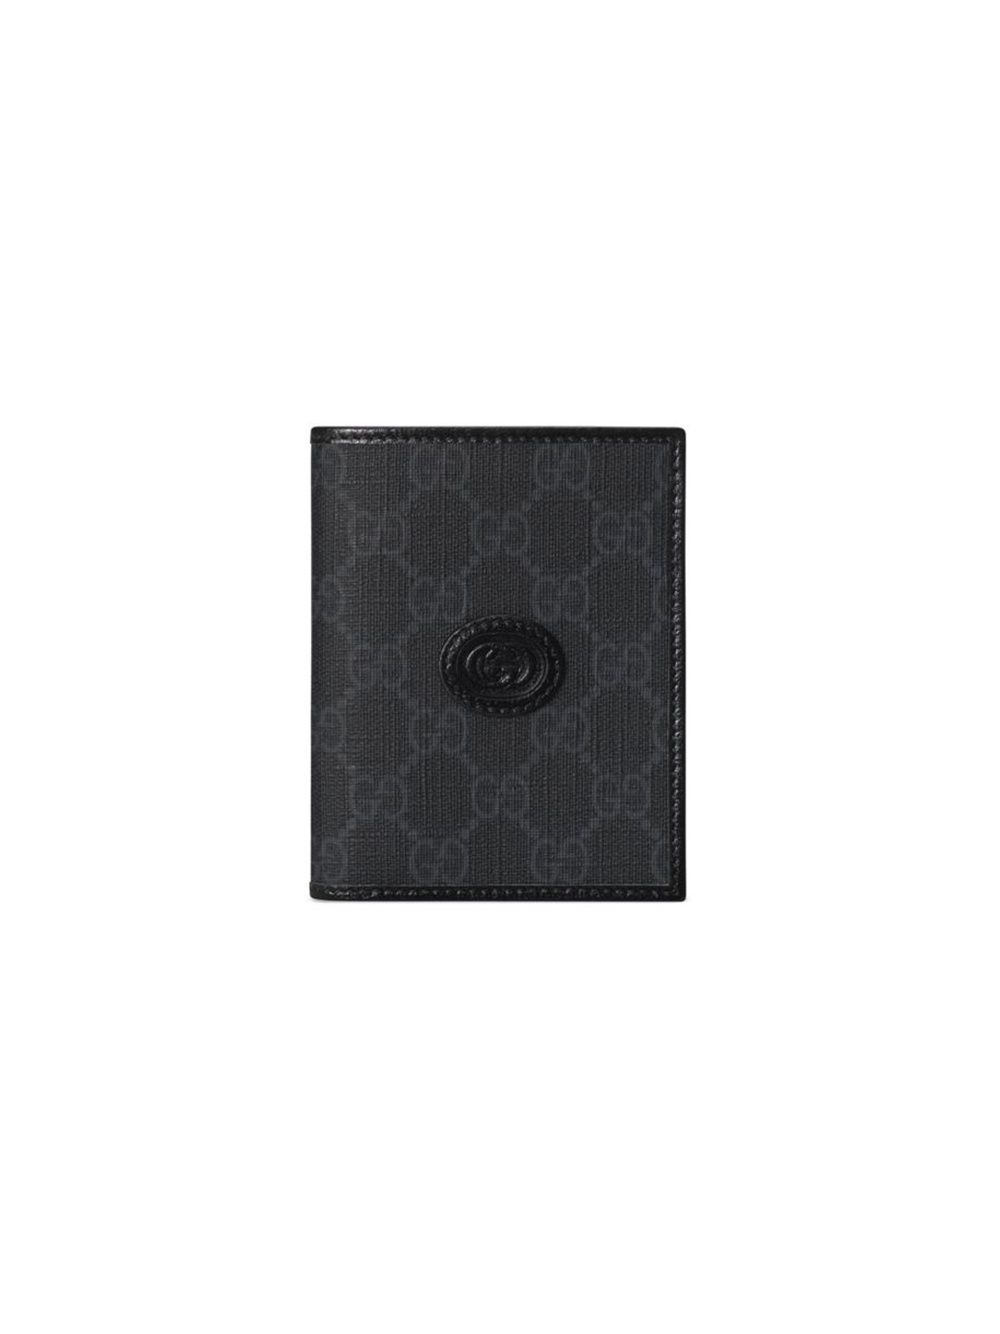 Card holder with gg logo - 1